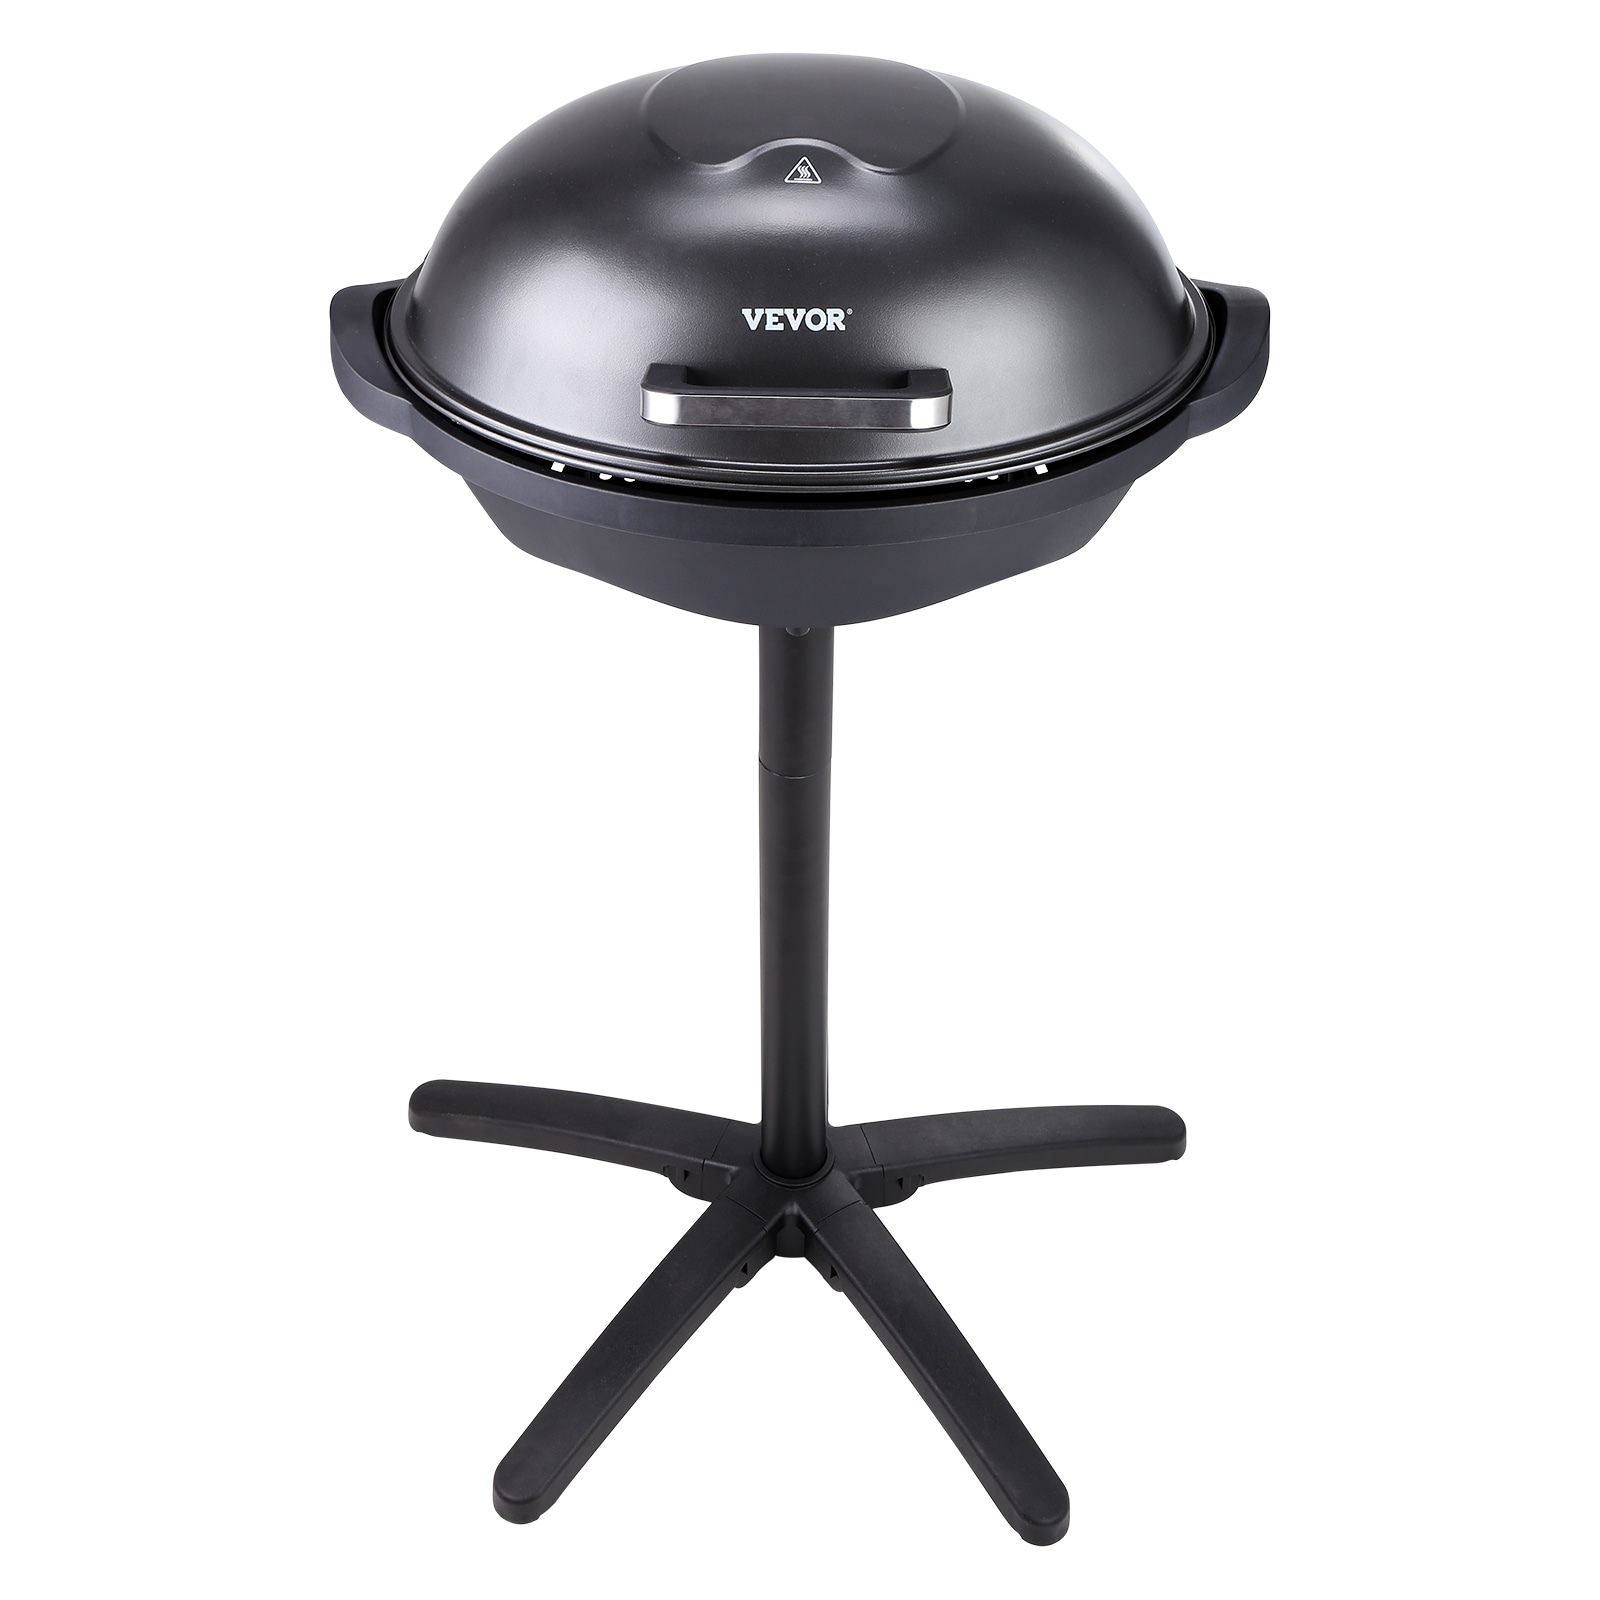 Smokeless Indoor Grill, 110 sq.in 1500W Electric BBQ Grill with